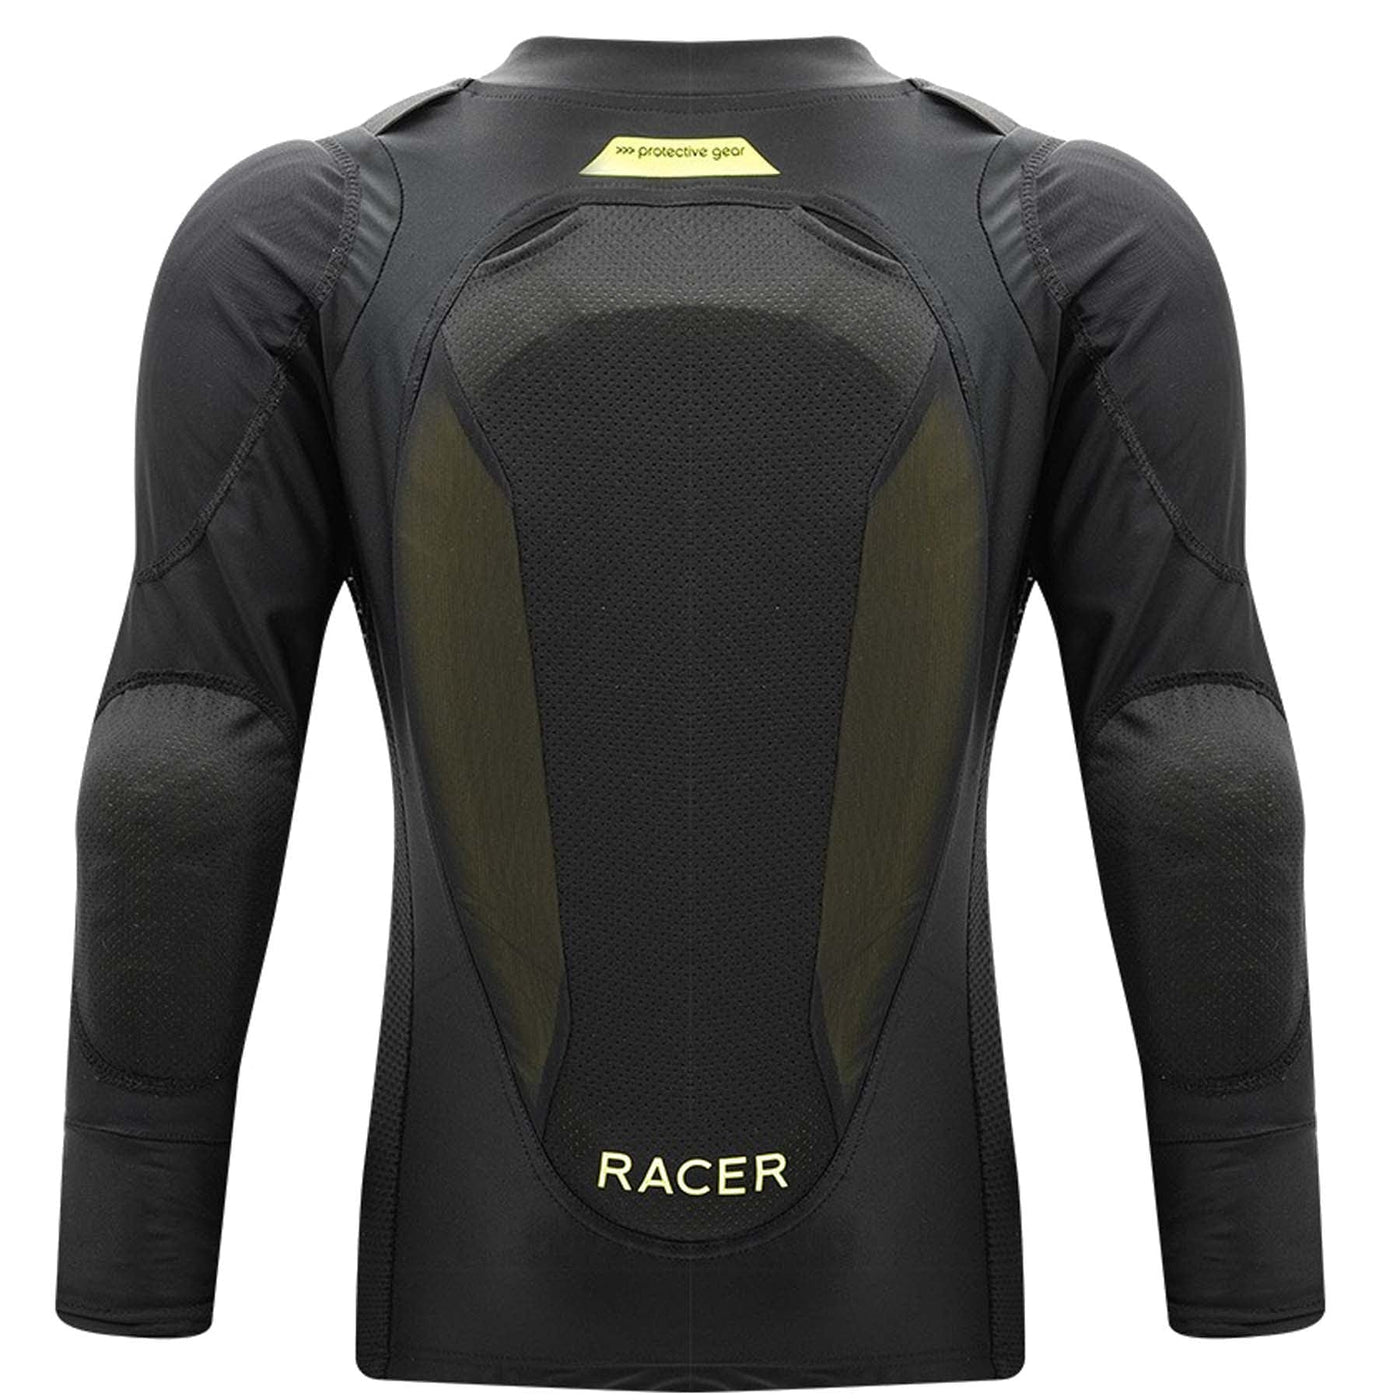 RACER France Mountain Top KID 3 - Body Protector 8Lines Shop - Fast Shipping